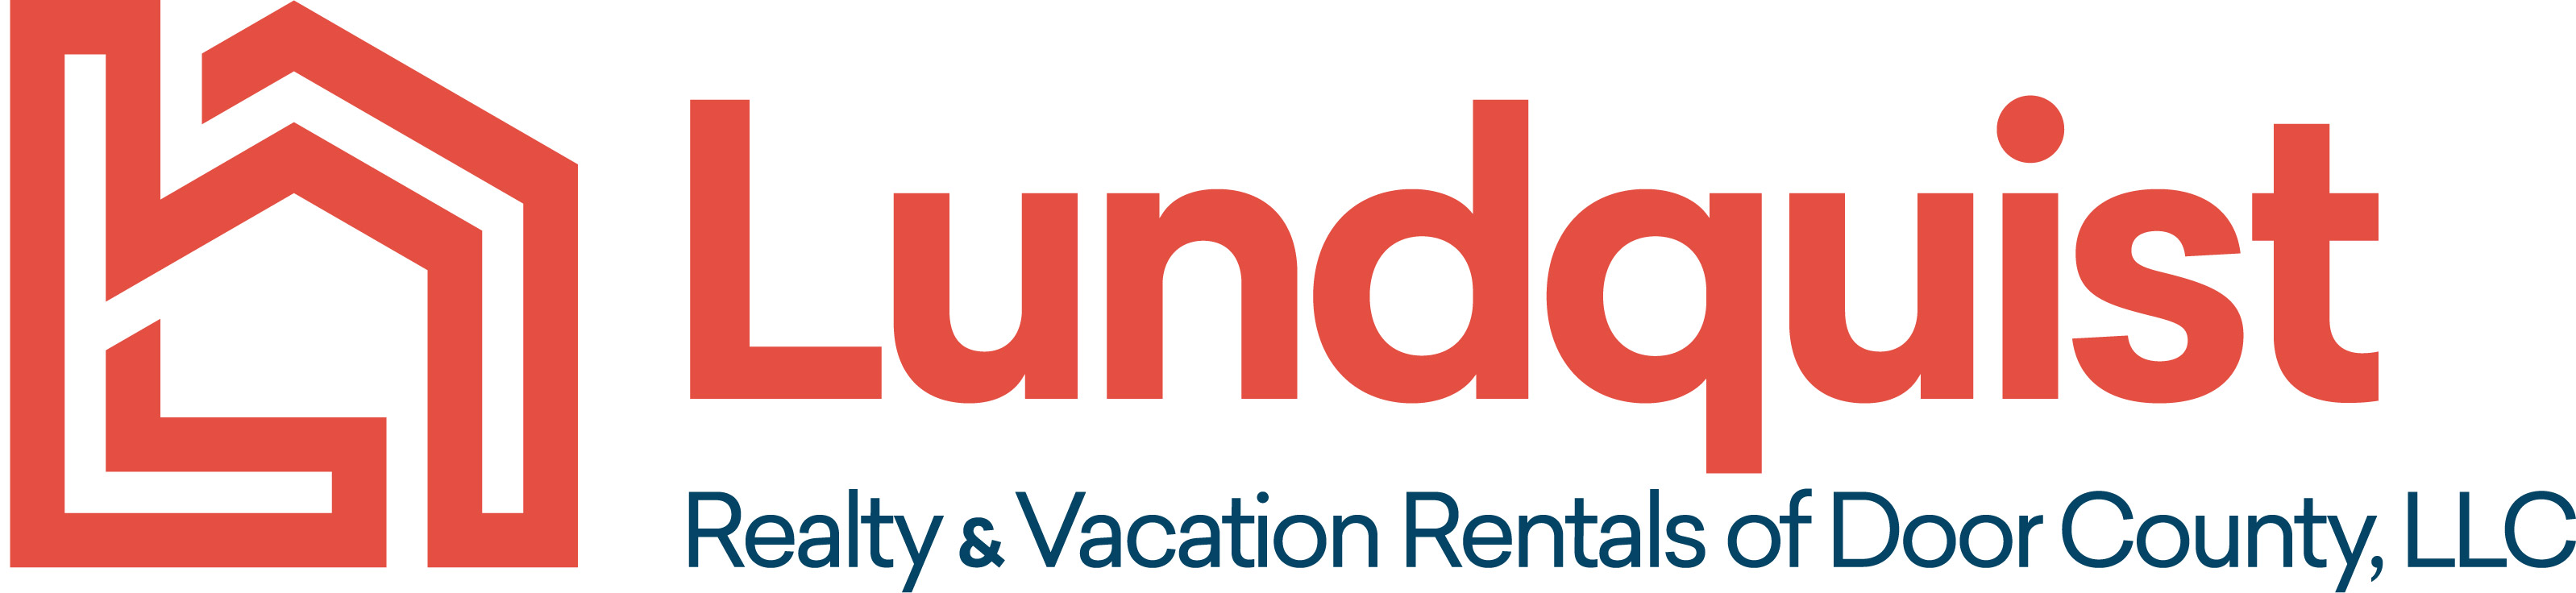 Lundquist Realty & Vacation Rentals of Door County - Helping Customers find their Ideal Property in Door County Wisconsin since 1966!